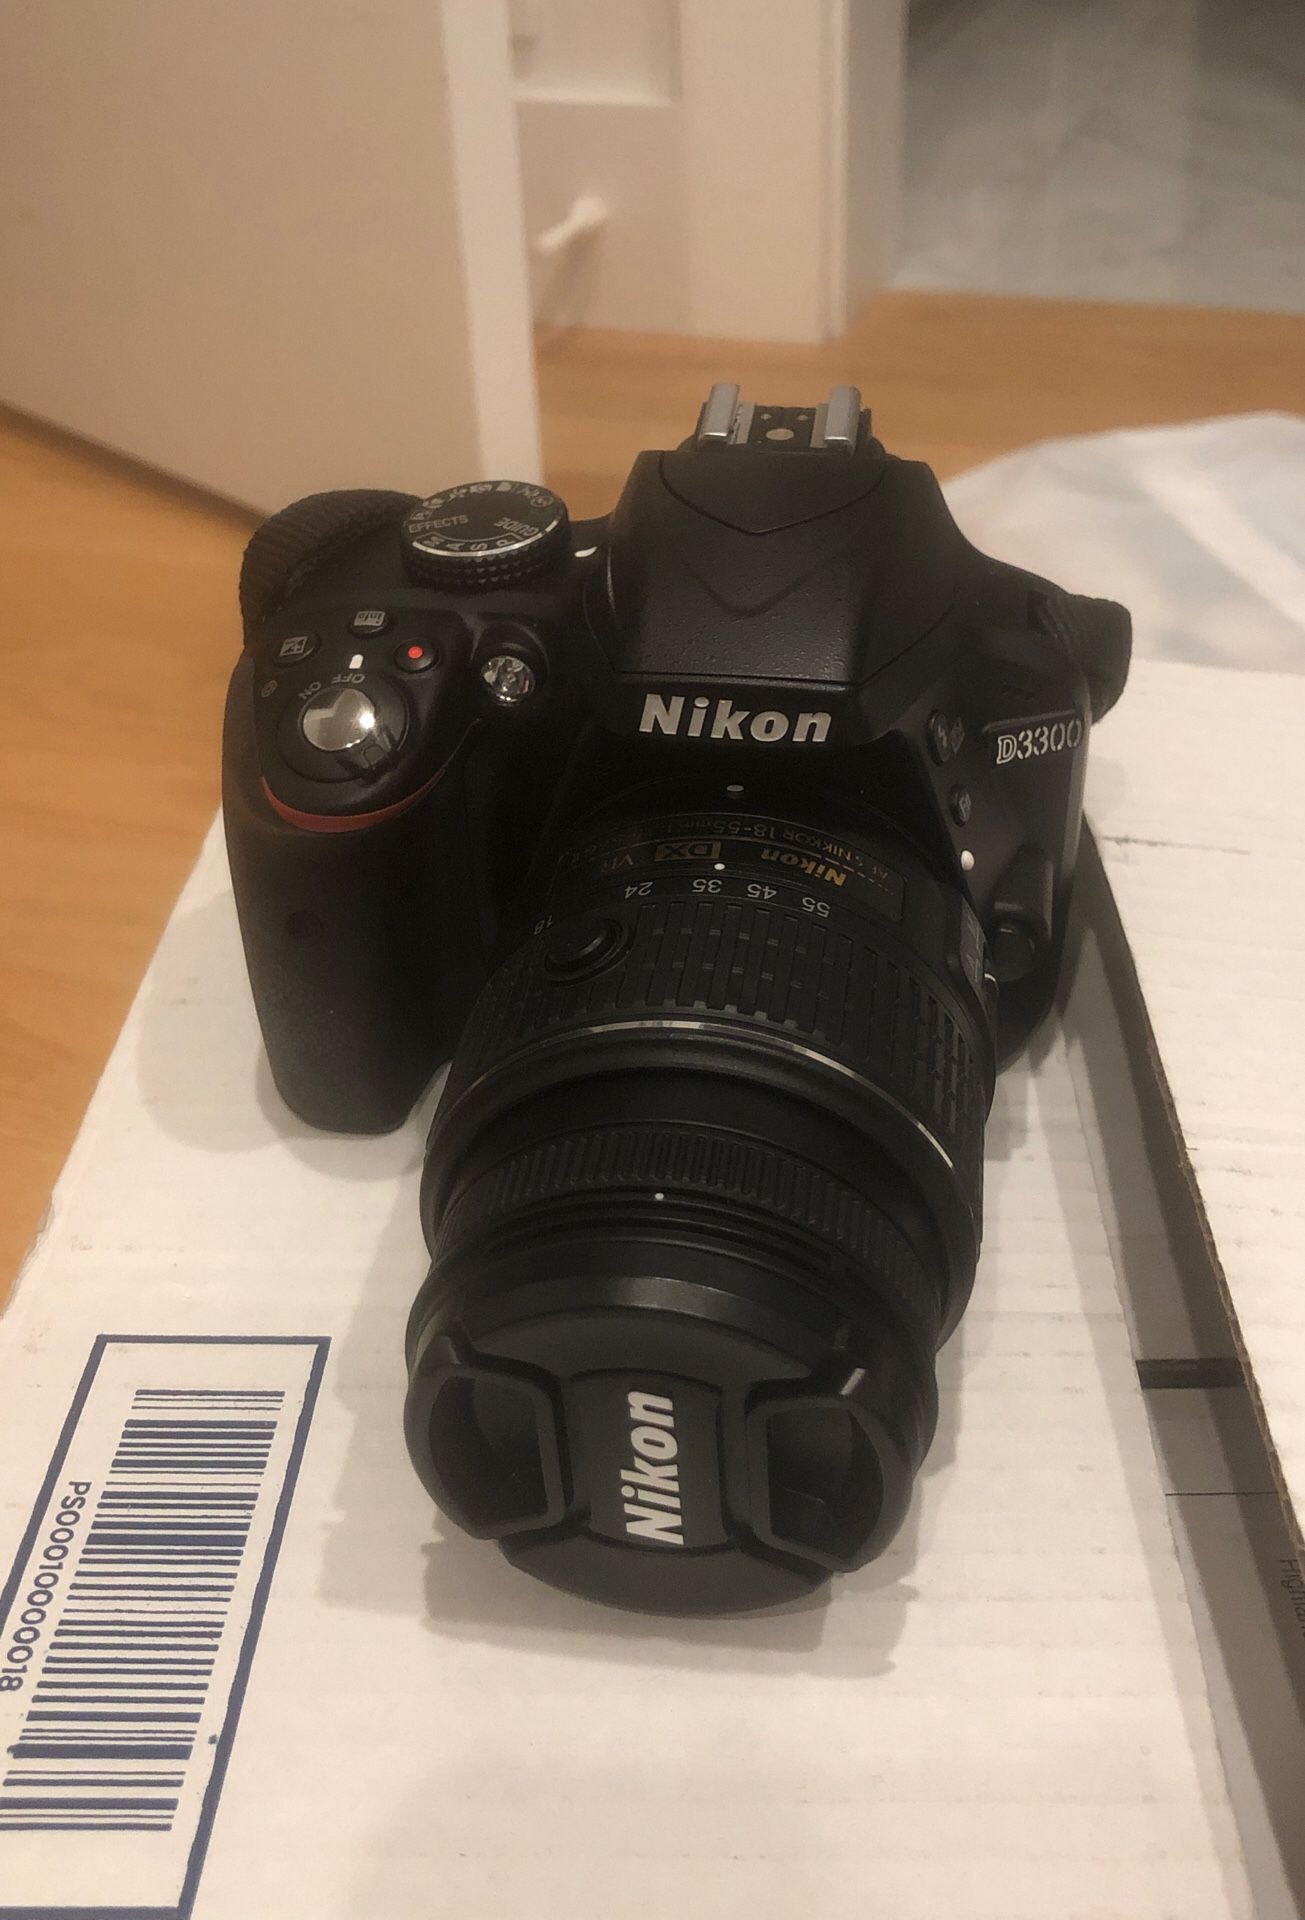 Nikon D3300 with charger/ battery and two lenses (18-55 and 55-200) and bag